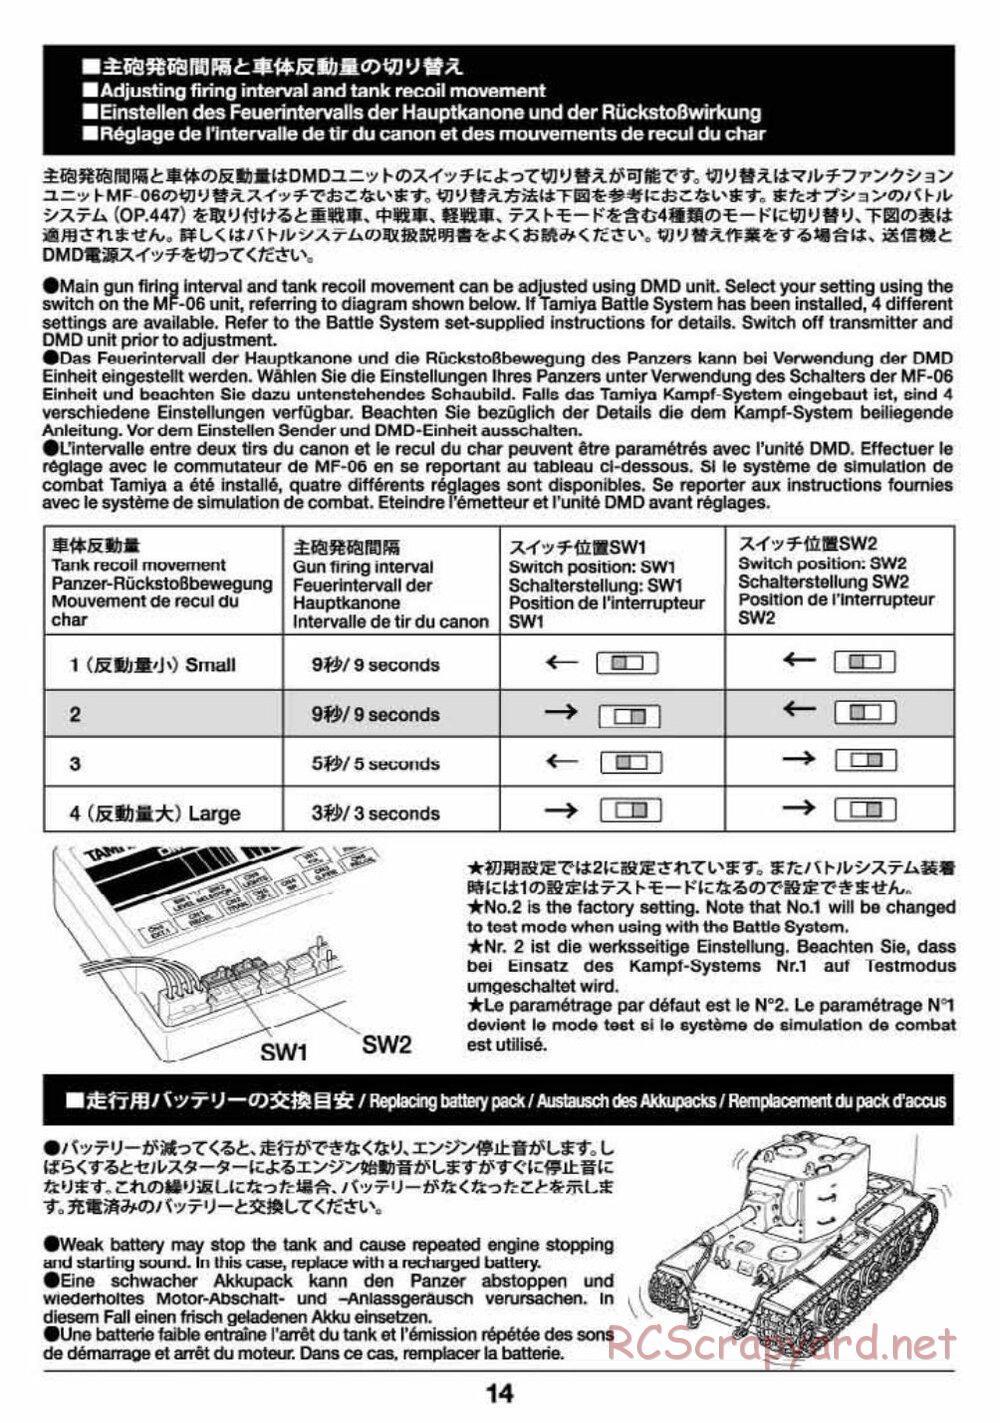 Tamiya - Russian Heavy Tank KV-2 Gigant - 1/16 Scale Chassis - Operation Manual - Page 14